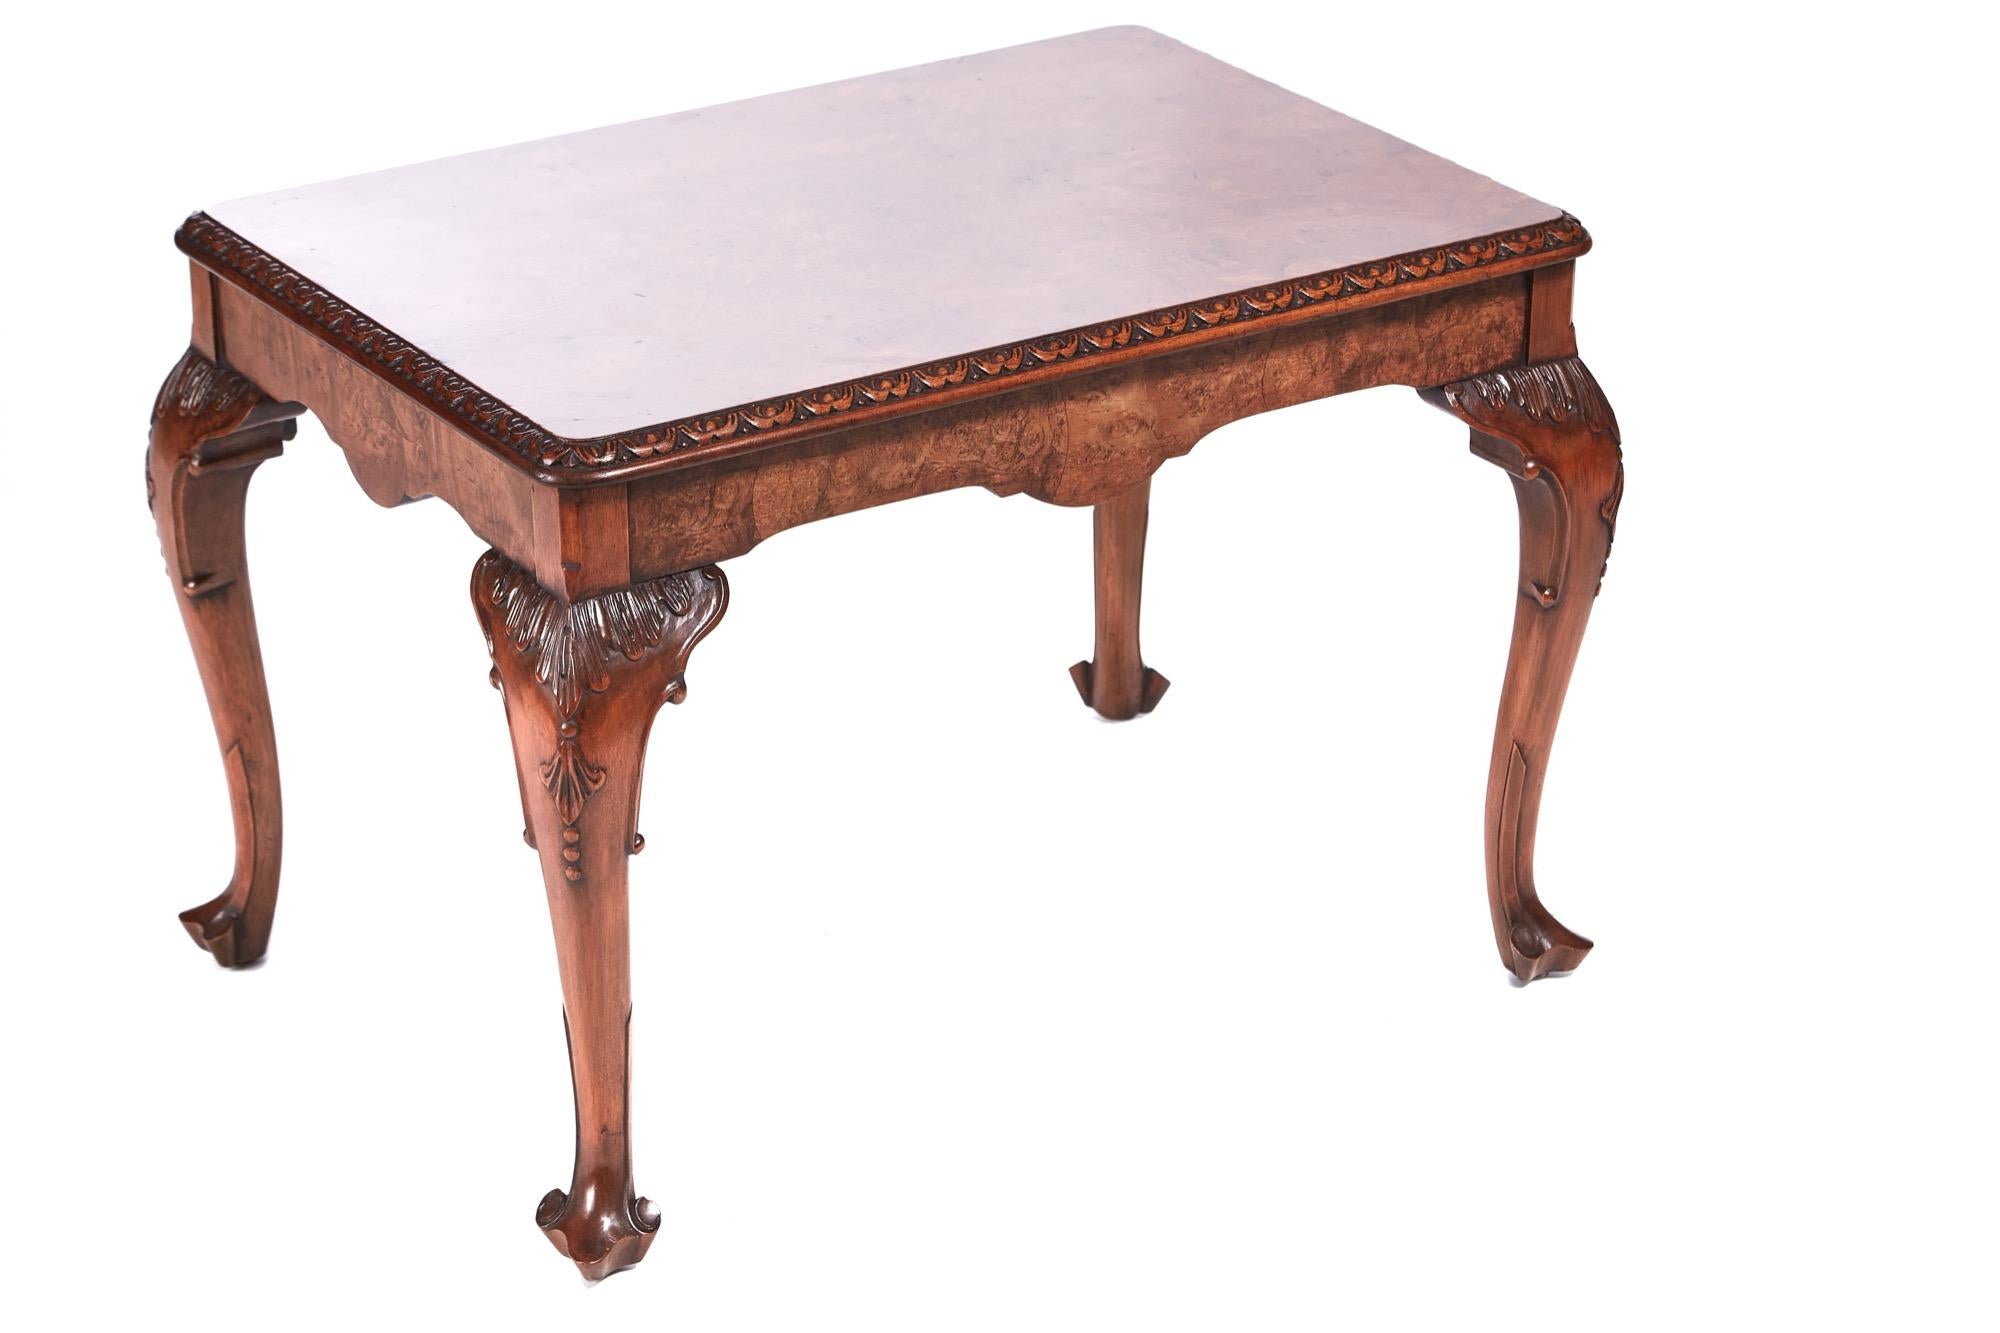 Quality antique burr walnut coffee table having a quality burr walnut top with a carved edge. Shaped frieze standing on 4 shaped carved cabriole legs with carved knees.
Fantastic color and condition.
Measures: 26